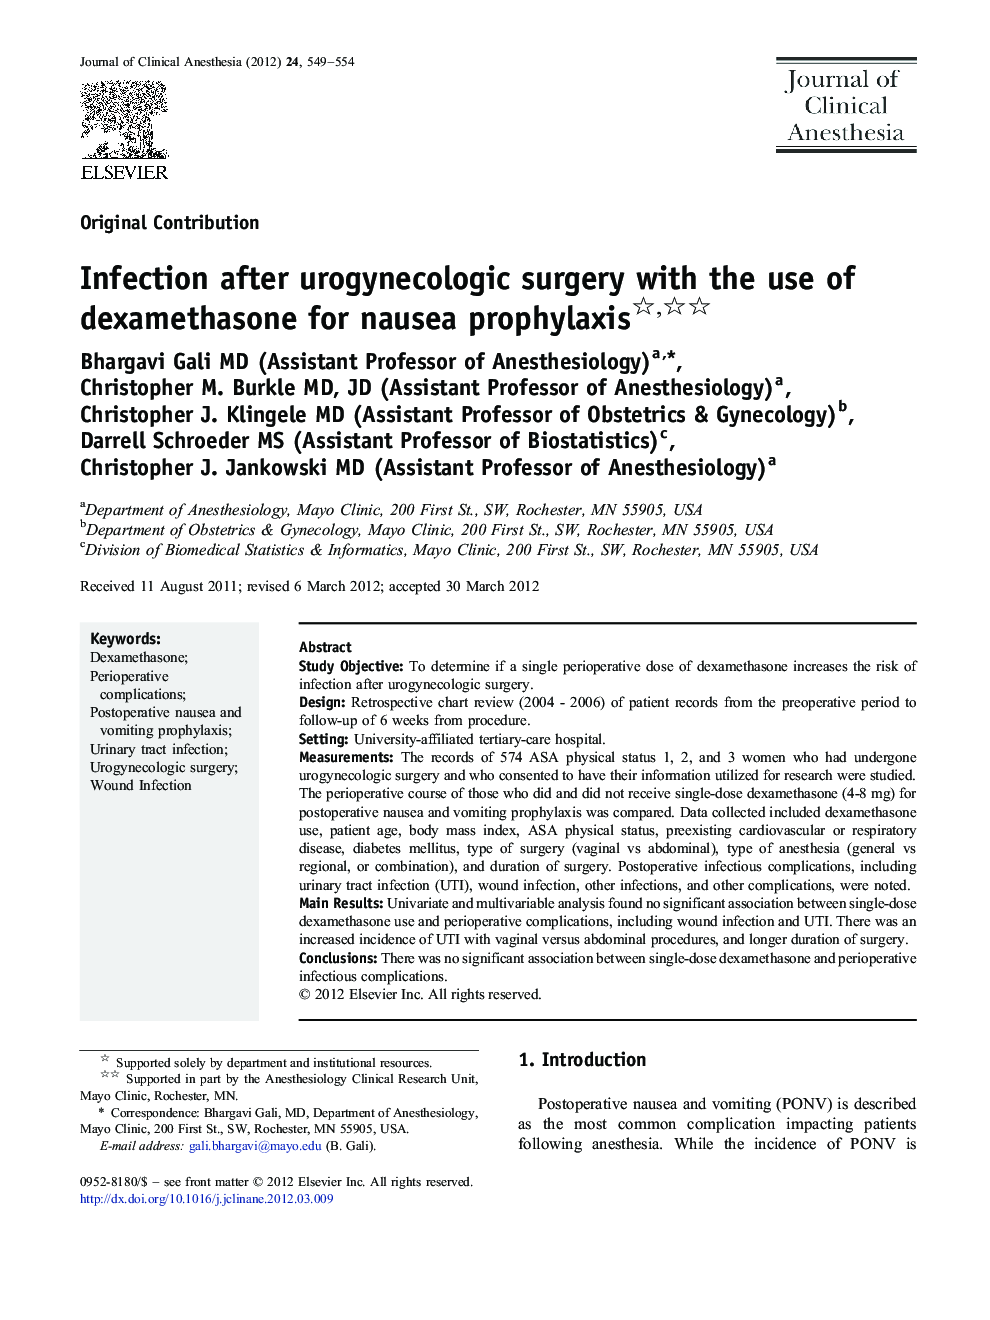 Infection after urogynecologic surgery with the use of dexamethasone for nausea prophylaxis 